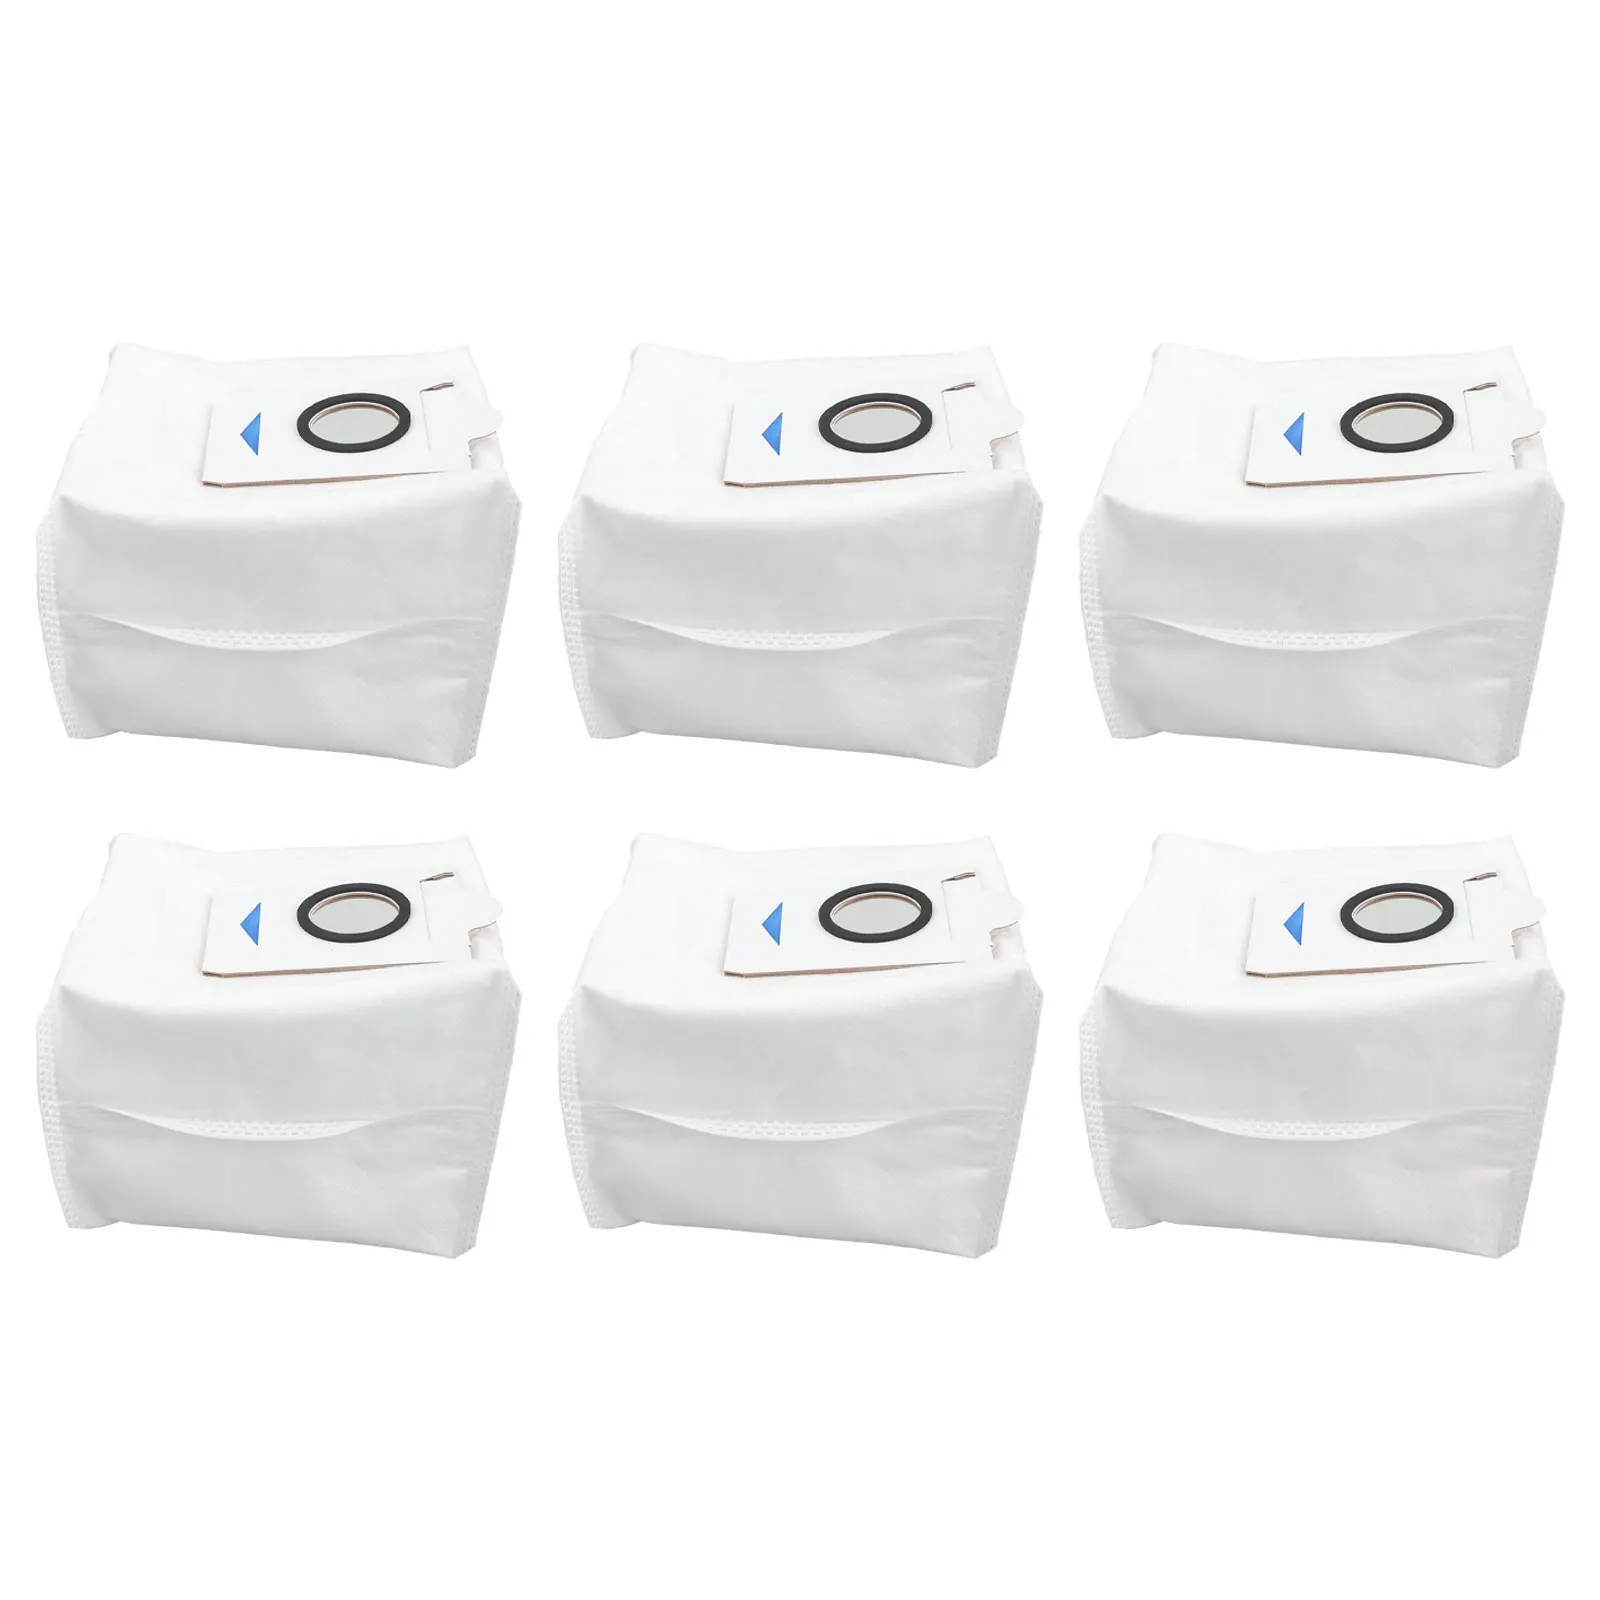 

Ensure a Dust Free Environment with 6 Replacement Dust Bags for ECOVACS For DEEBOT DDB030025 X2 Omni Robot Vacuum Cleaner